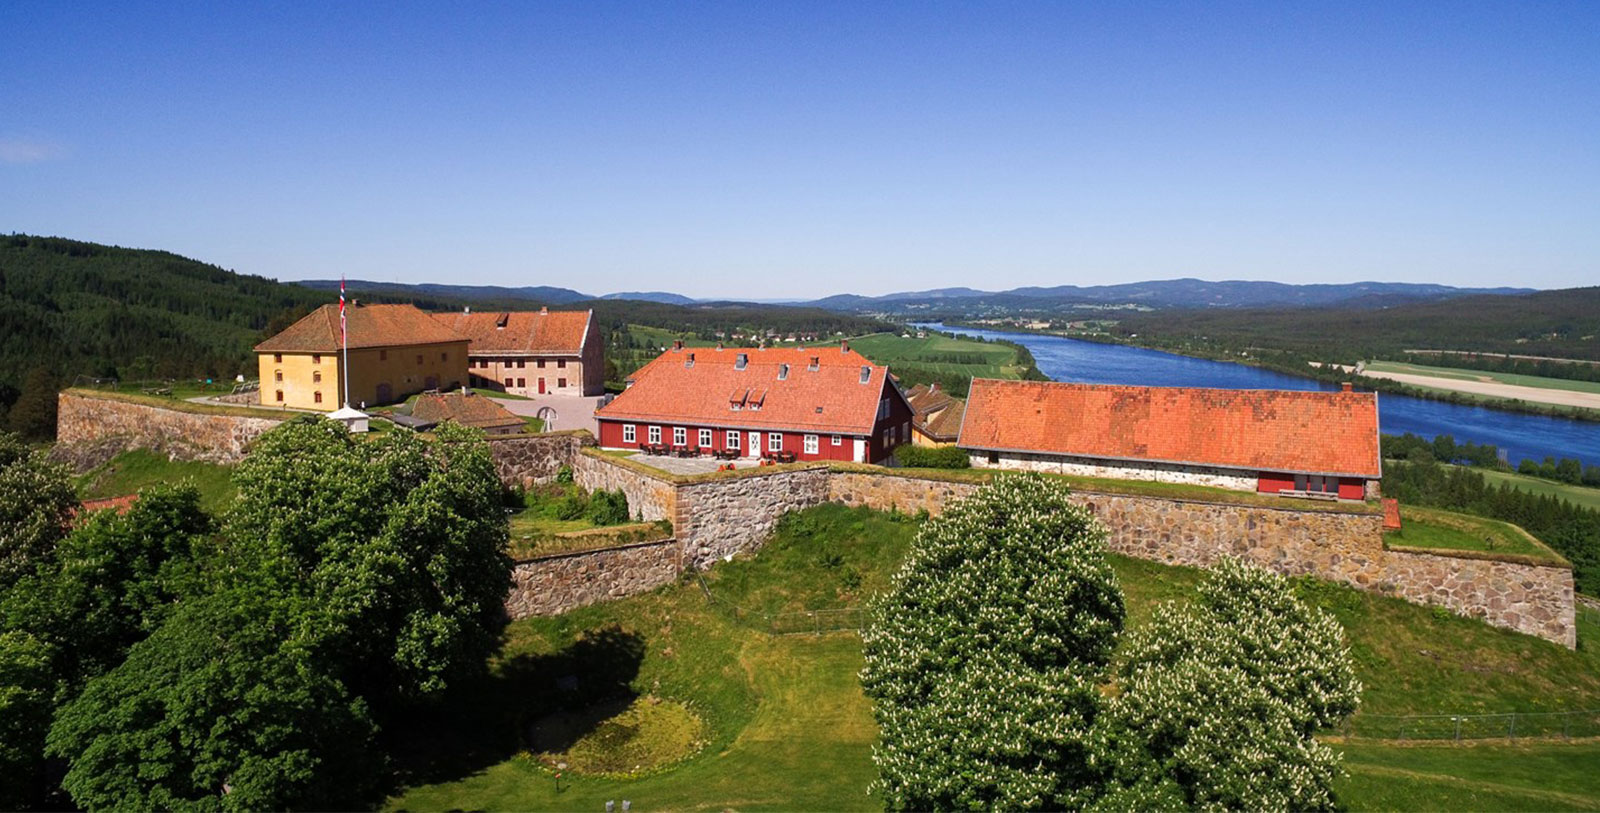 Explore the Krongsvinger Fortress complex just steps from the hotel.